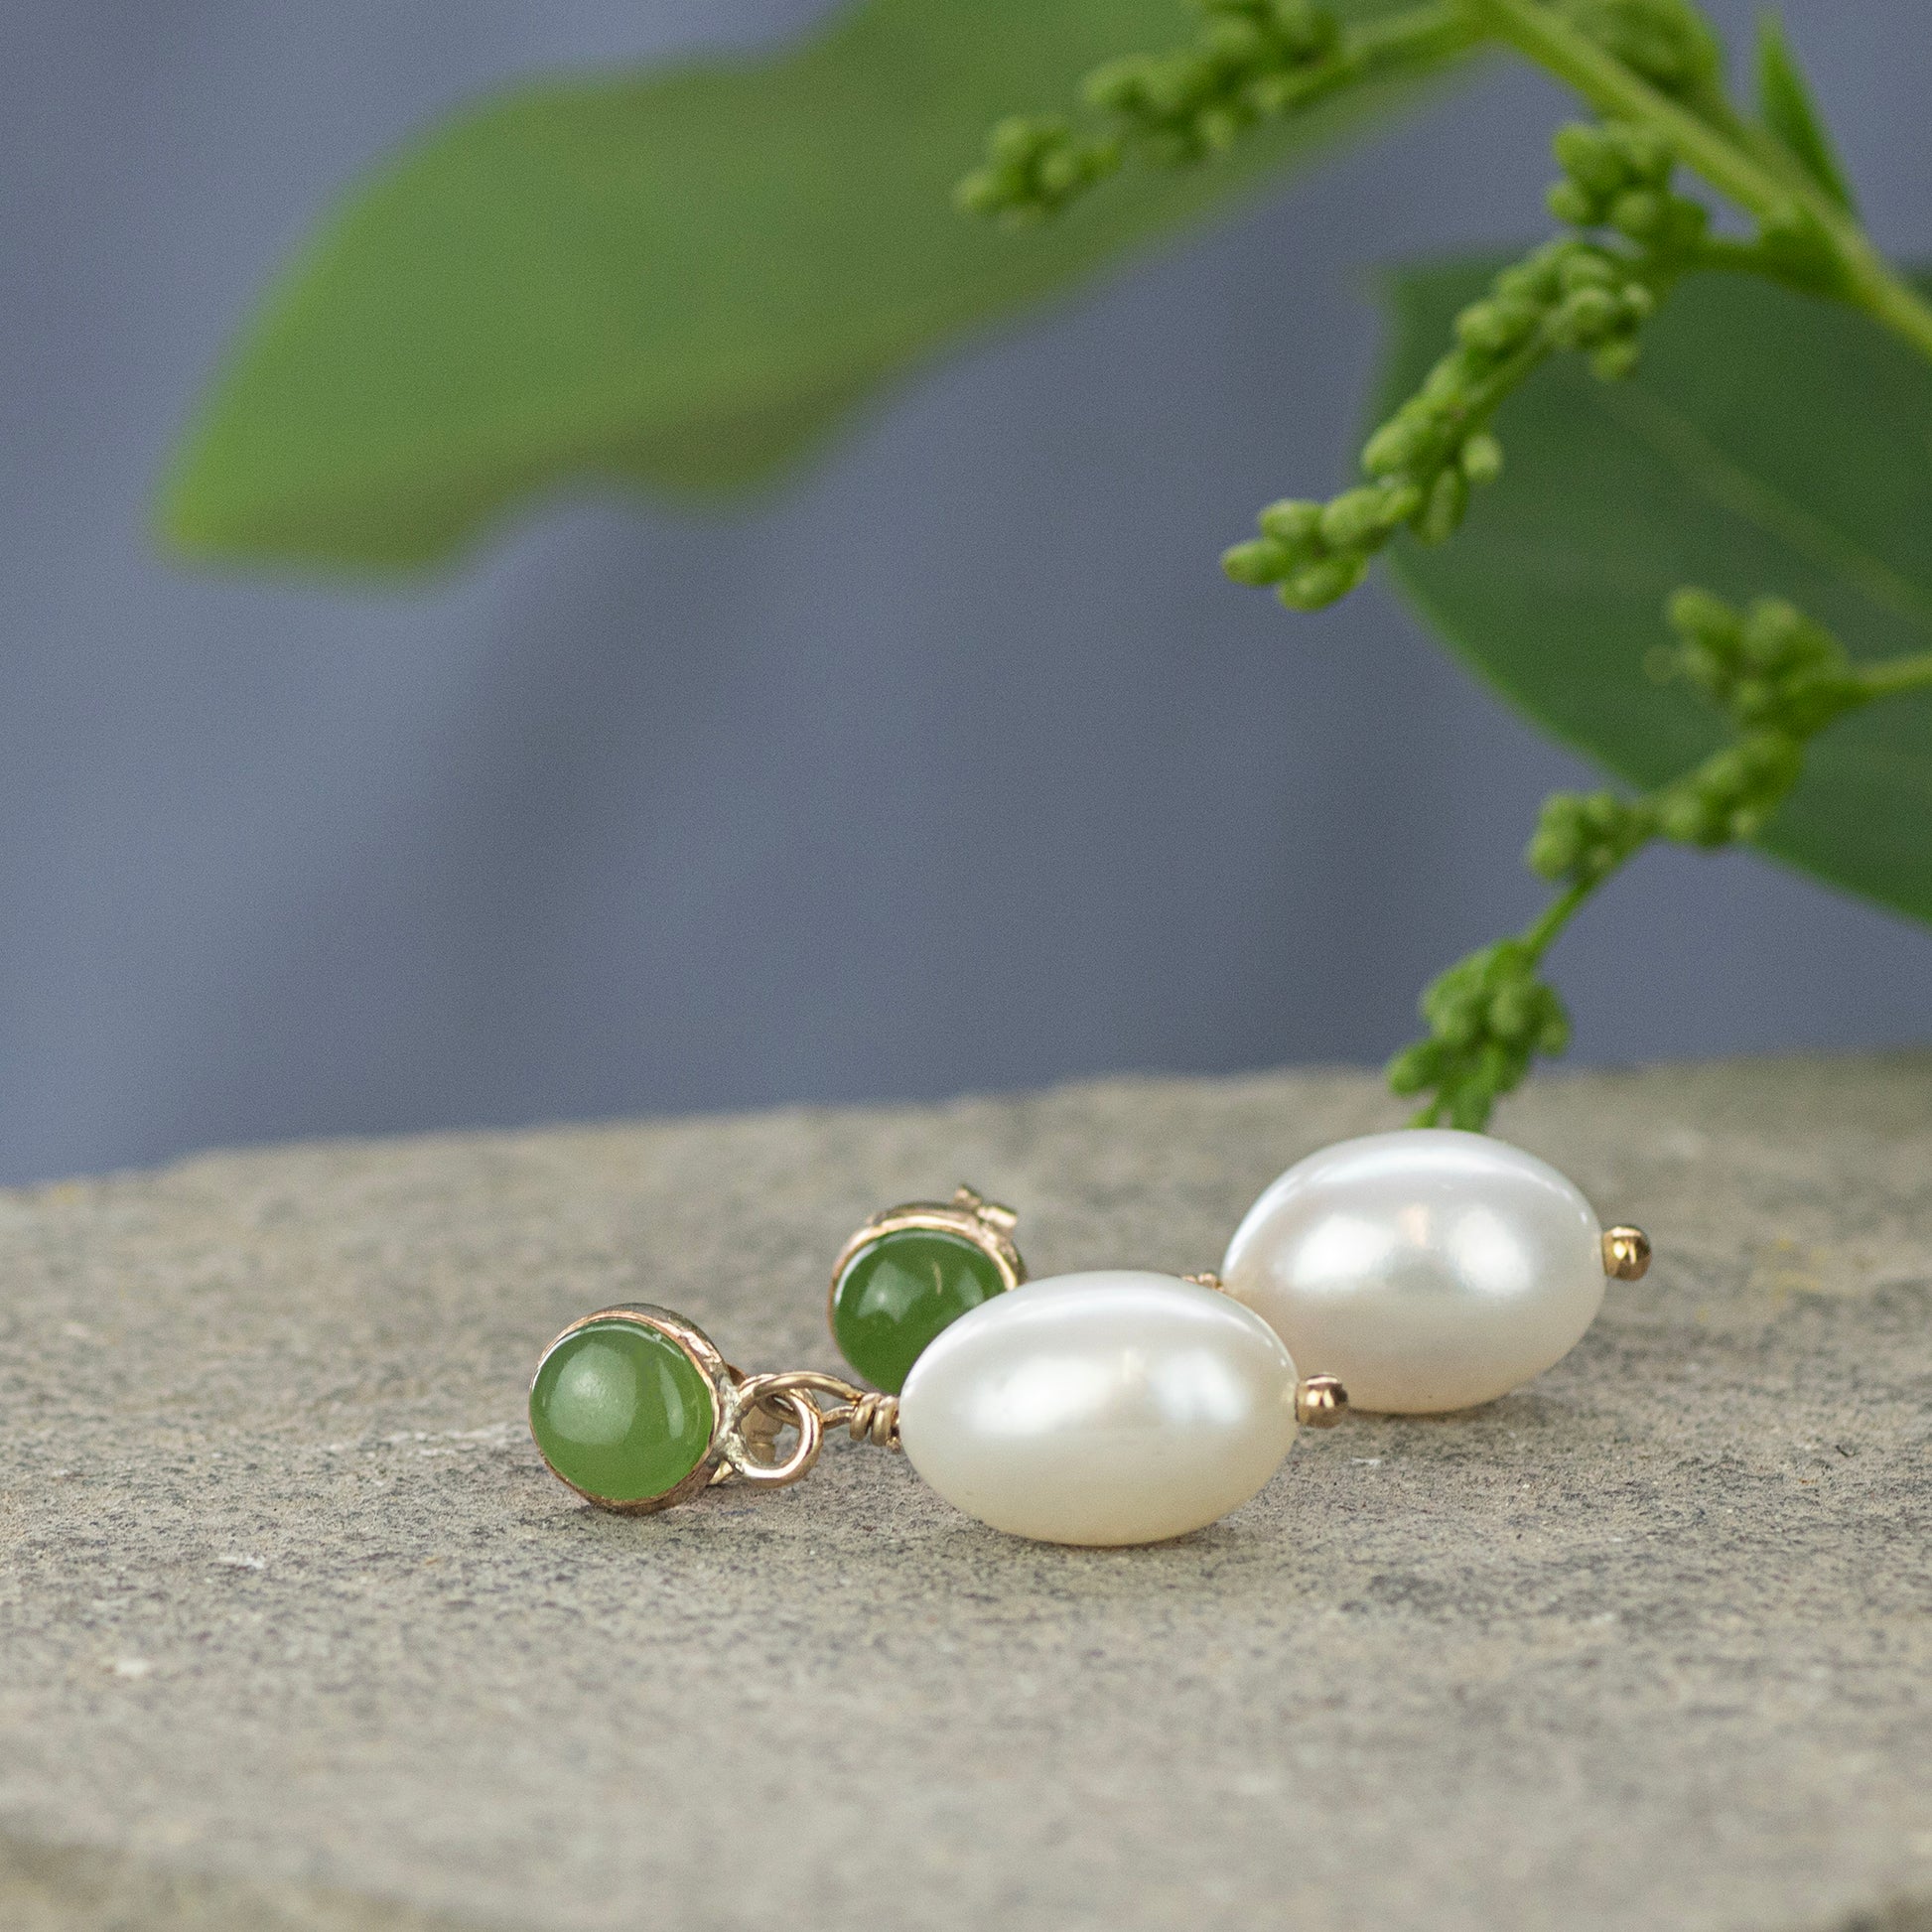 12th Anniversary Gift - Jade Anniversary Earrings - Silver & Gold